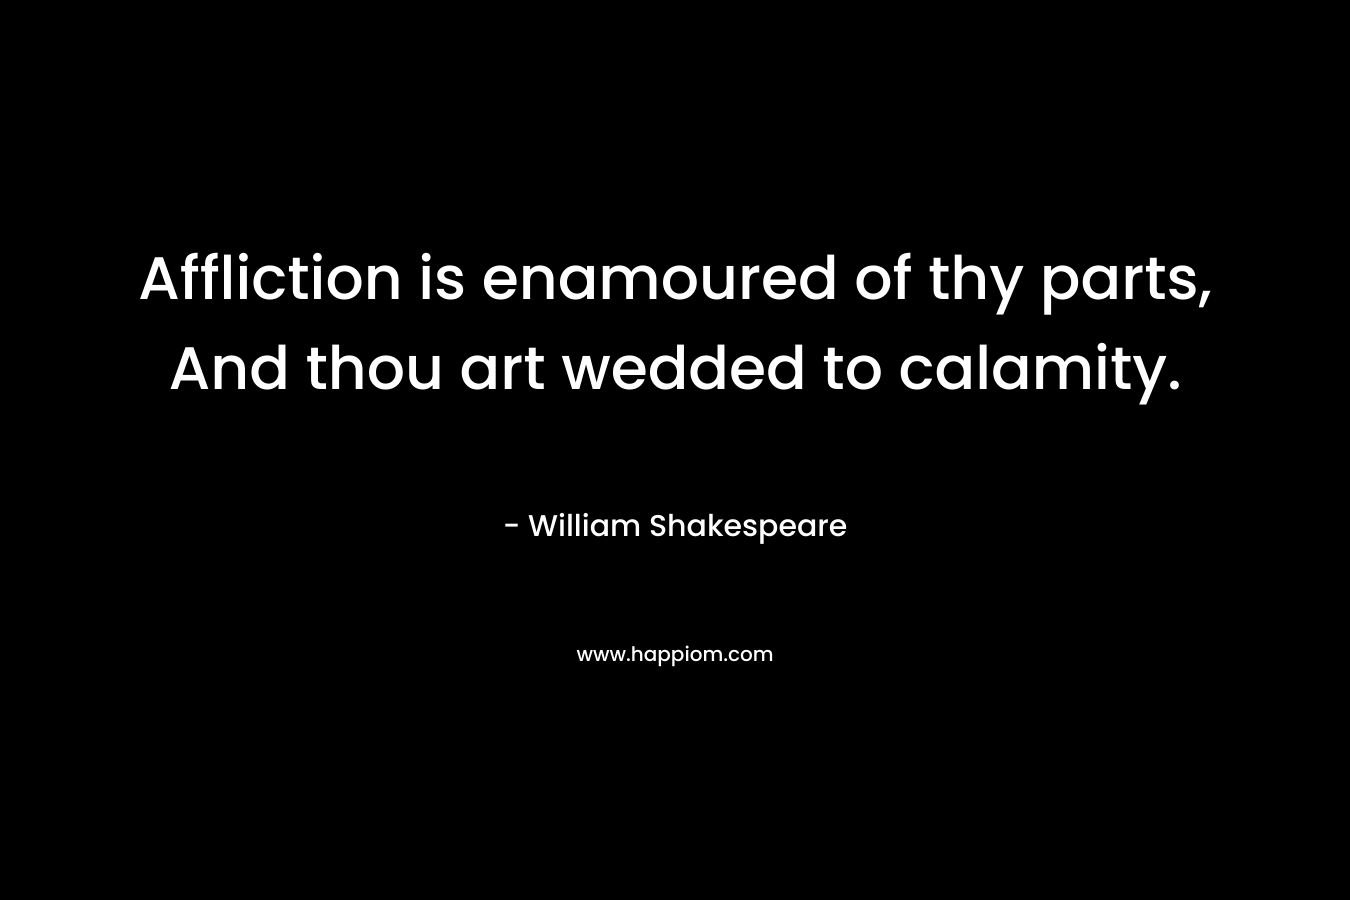 Affliction is enamoured of thy parts, And thou art wedded to calamity. – William Shakespeare